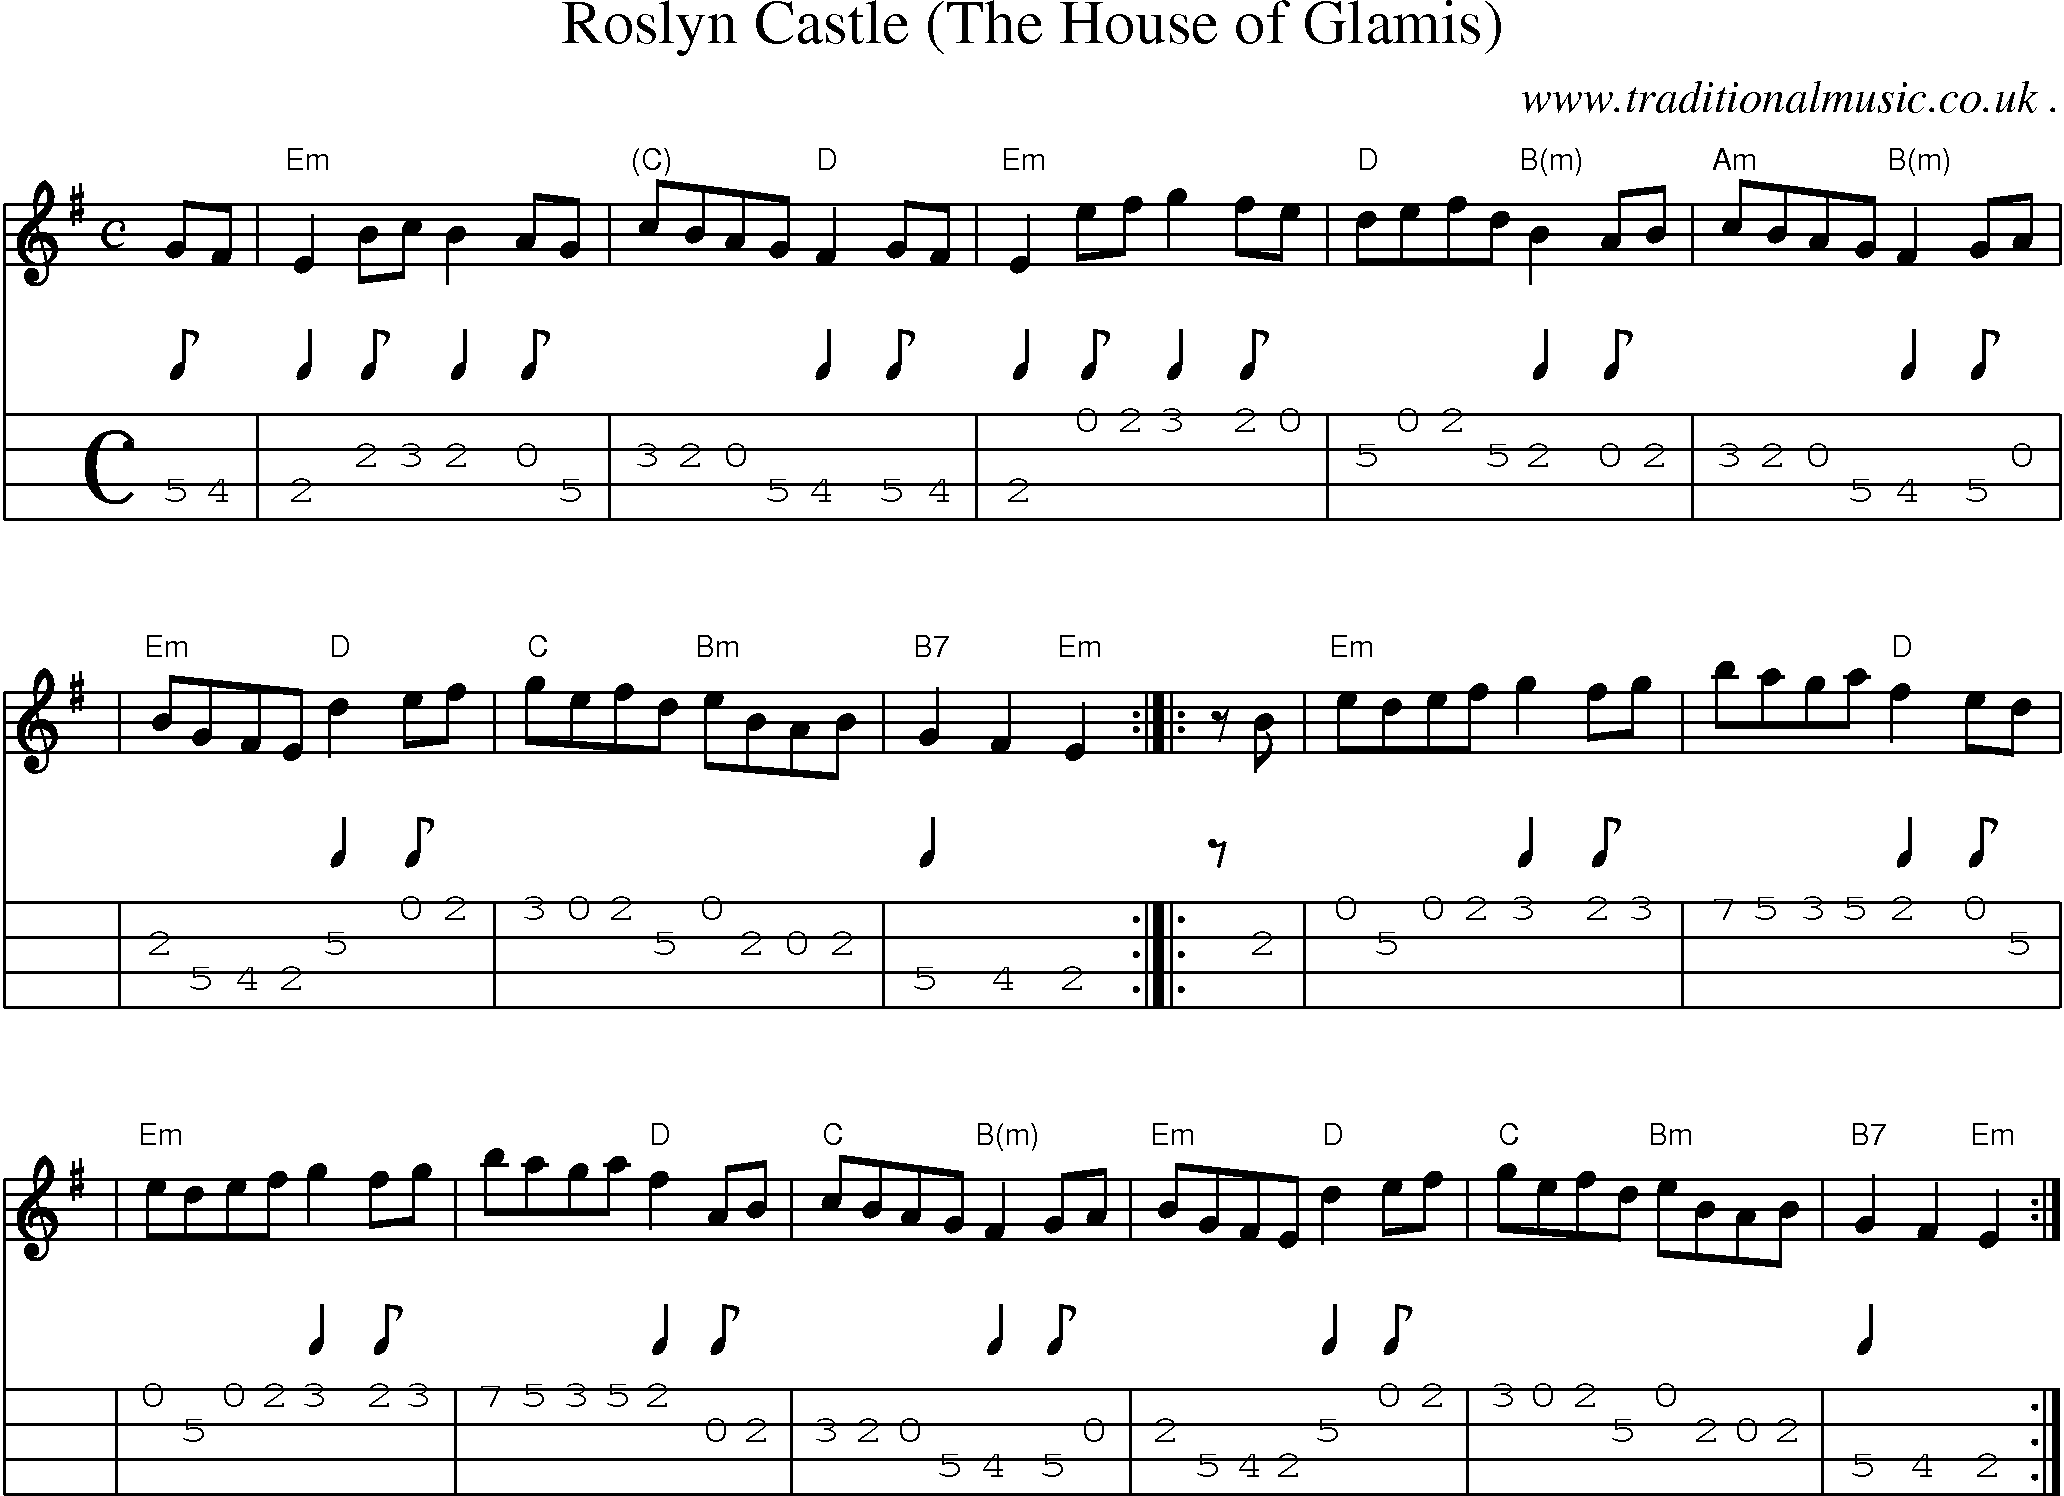 Sheet-music  score, Chords and Mandolin Tabs for Roslyn Castle The House Of Glamis